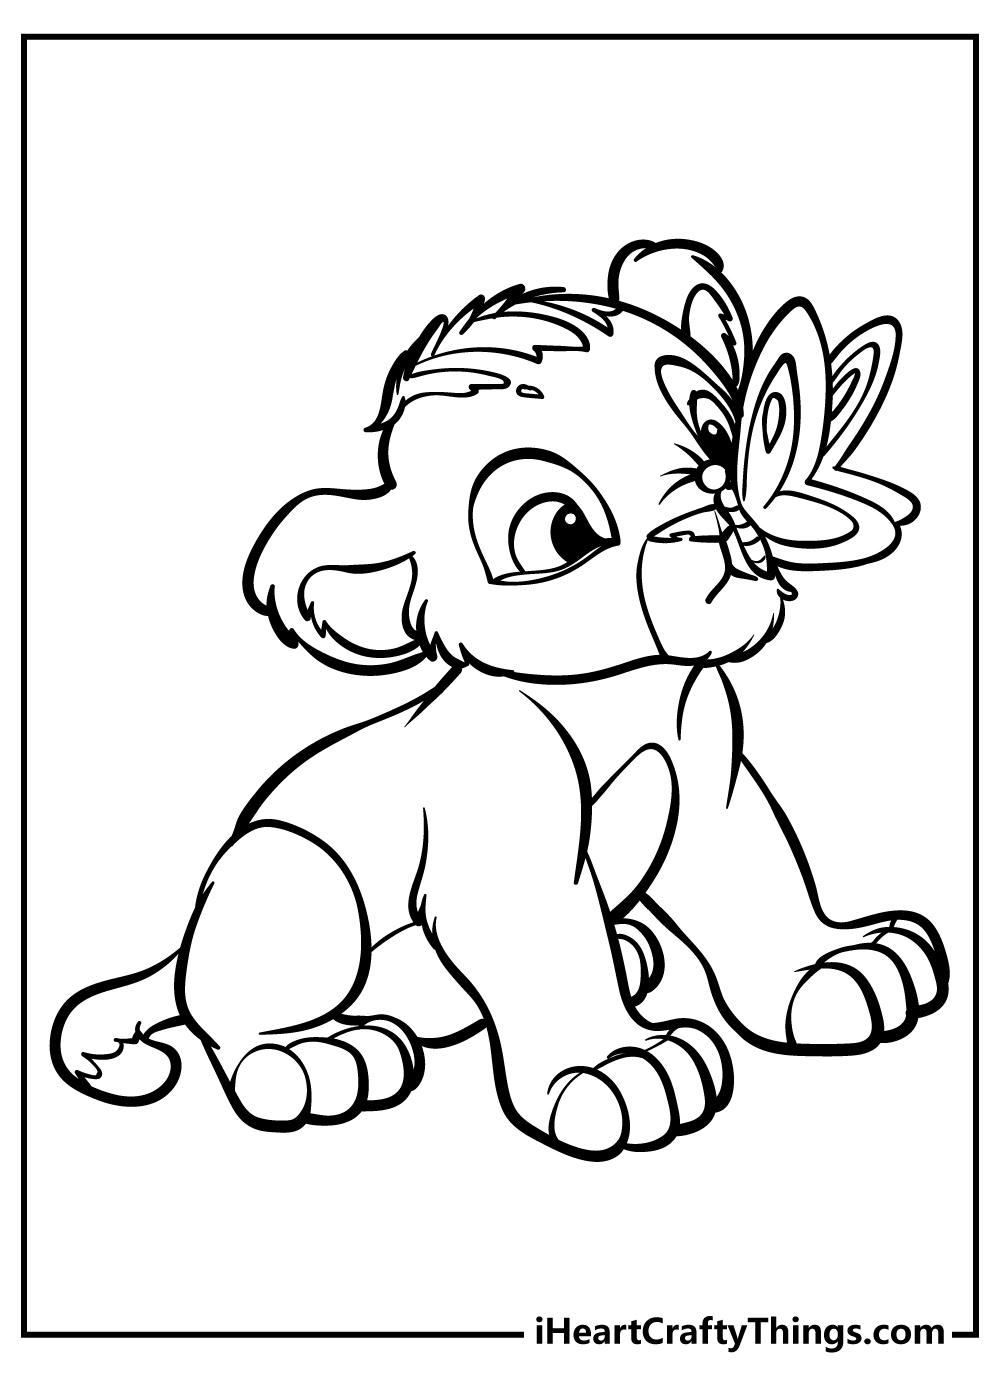 Lion king coloring pages free printables